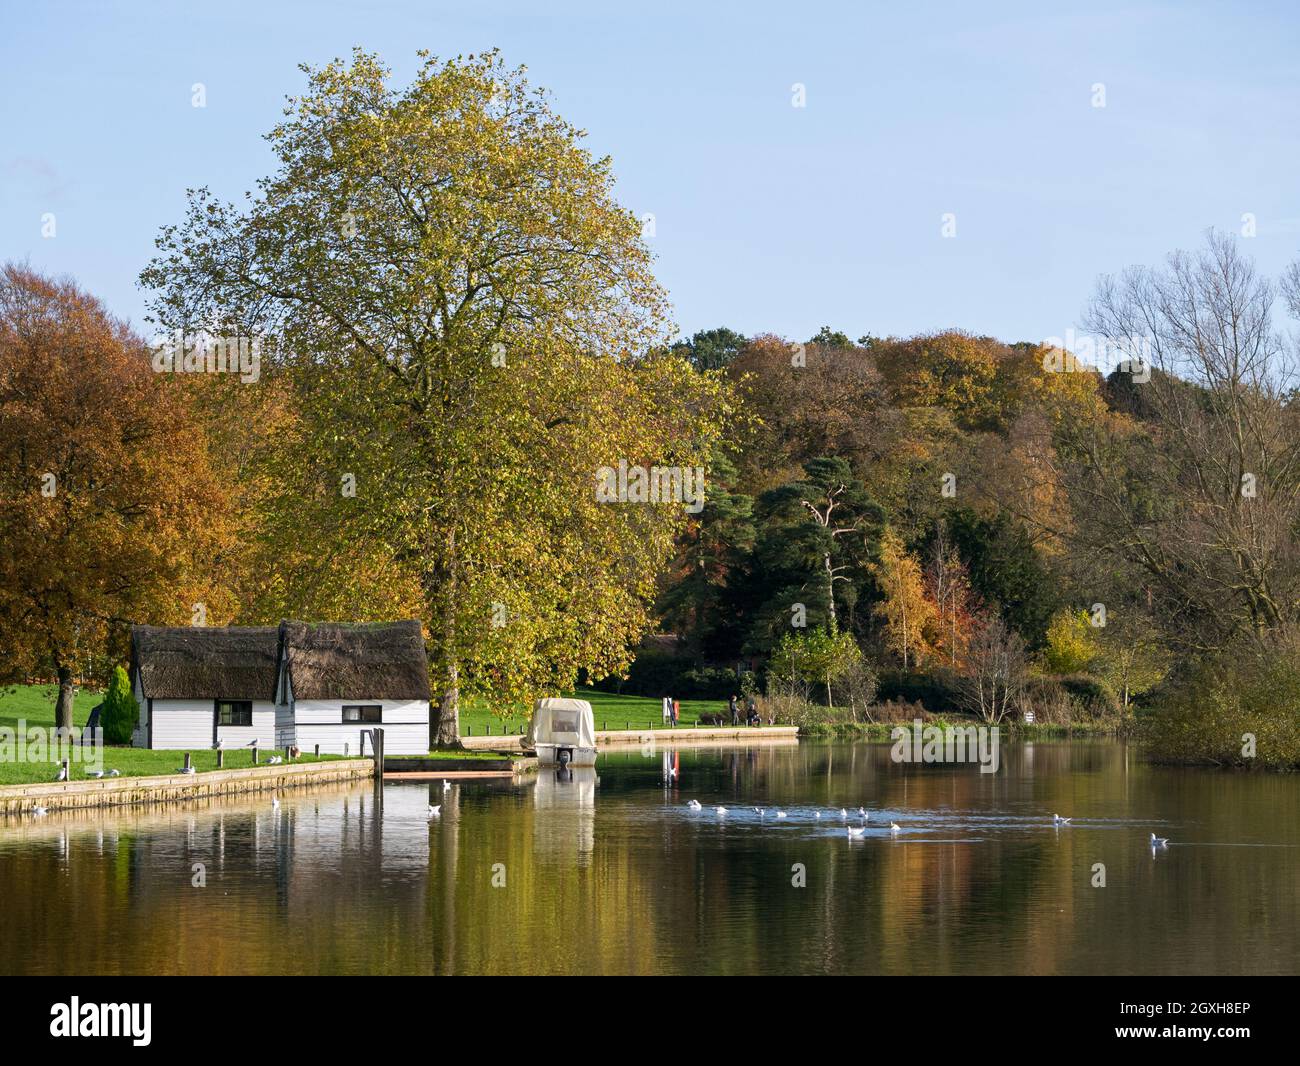 The Norfolk Broads in Autumn on The River Bure at Picturesque Coltishall Common, Coltishall, Norfolk, England, UK Stock Photo